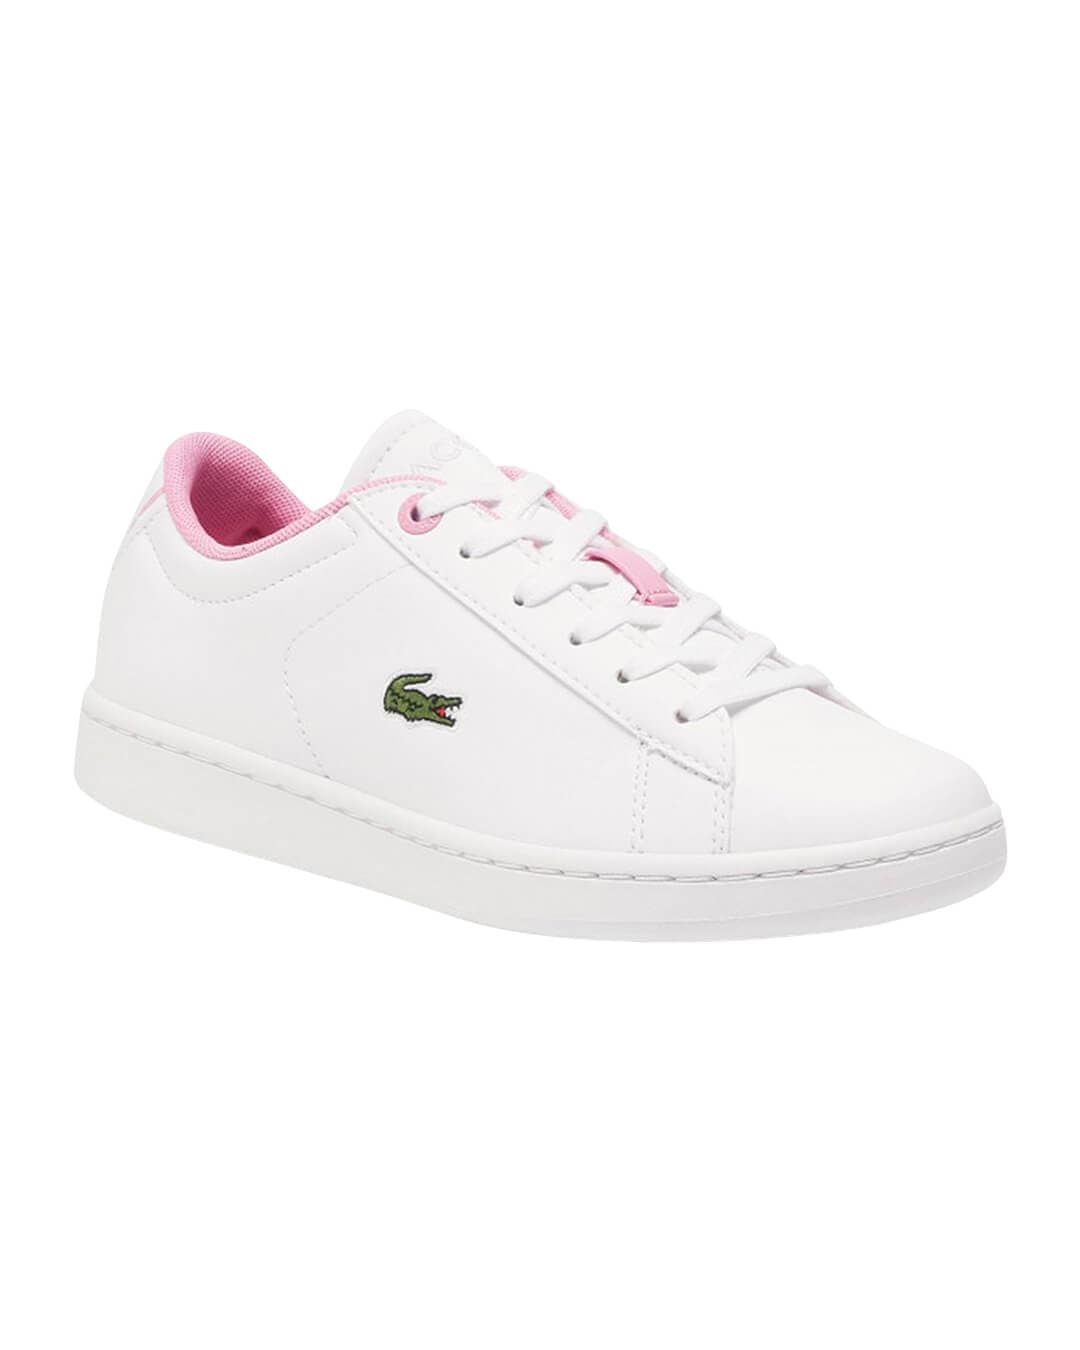 Lacoste Shoes Girls Lacoste Carnaby Evo Pink Sneakers